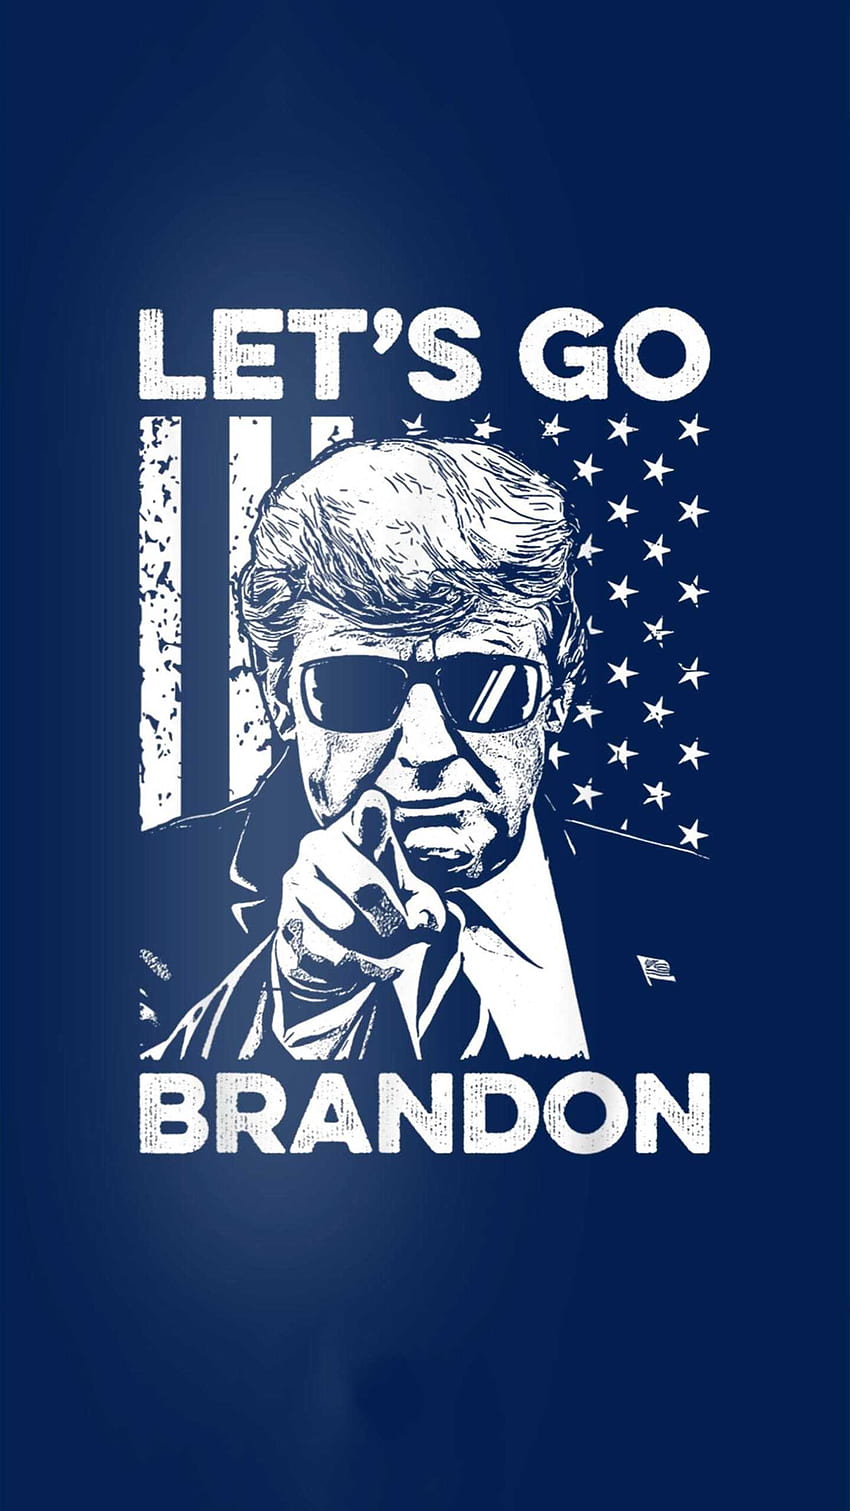 Lets Go Brandon Coloring Book Lets Go Brandon Patriotic FJB Funny  Political Coloring Book For Adults And Kids To Have Fun And Relax Great  Idea Gift For Everyone  Brandon Lets Go